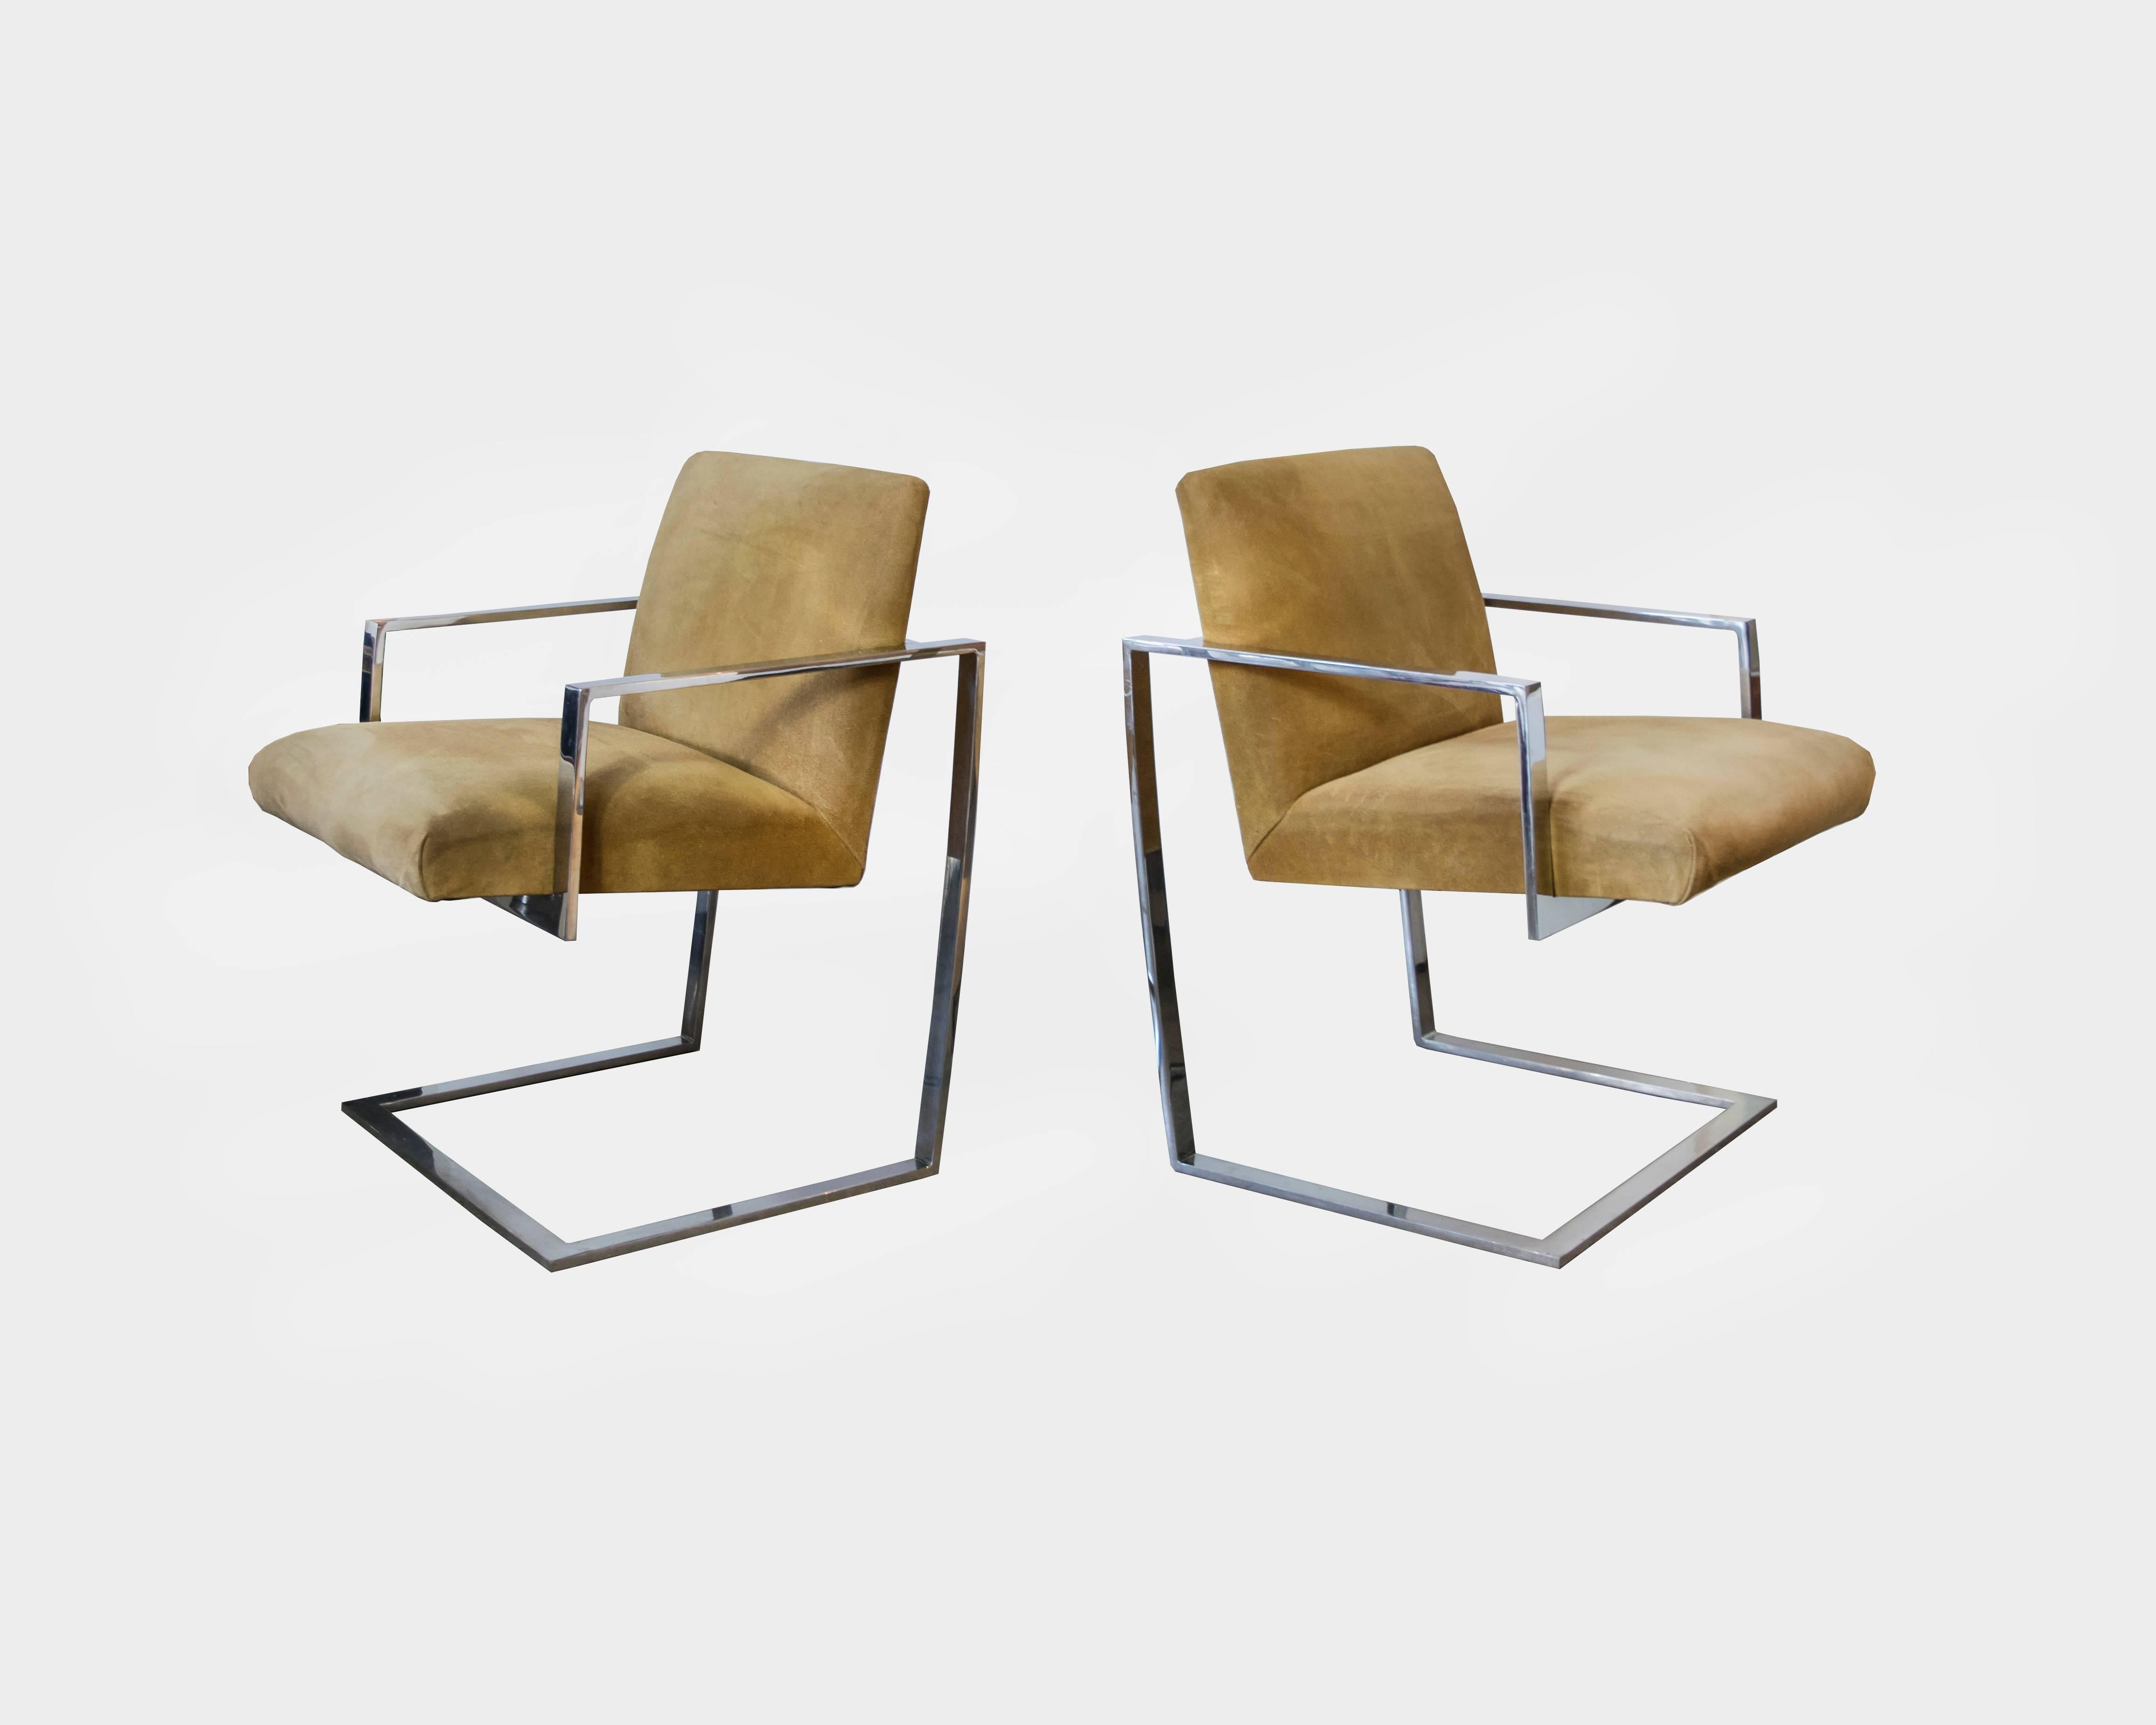 These chairs are astonishingly good looking. We've never seen another pair quite like them. They also have a slight rocking mechanism because of the cantilevered design. From any angle, these chairs are knockouts.